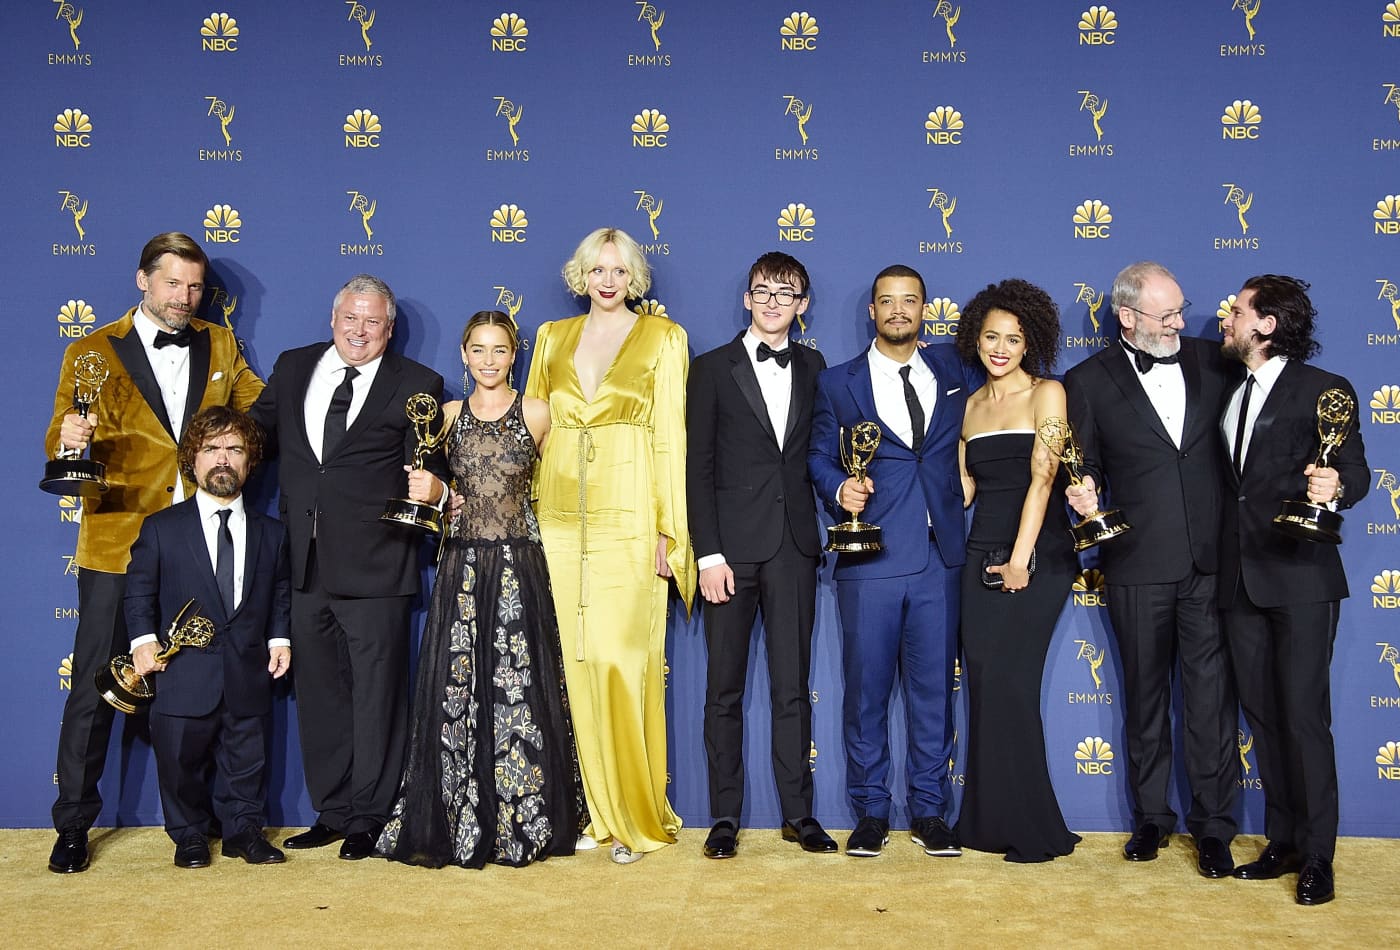 How Much An Episode Of Emmy Winner Game Of Thrones Costs To Produce